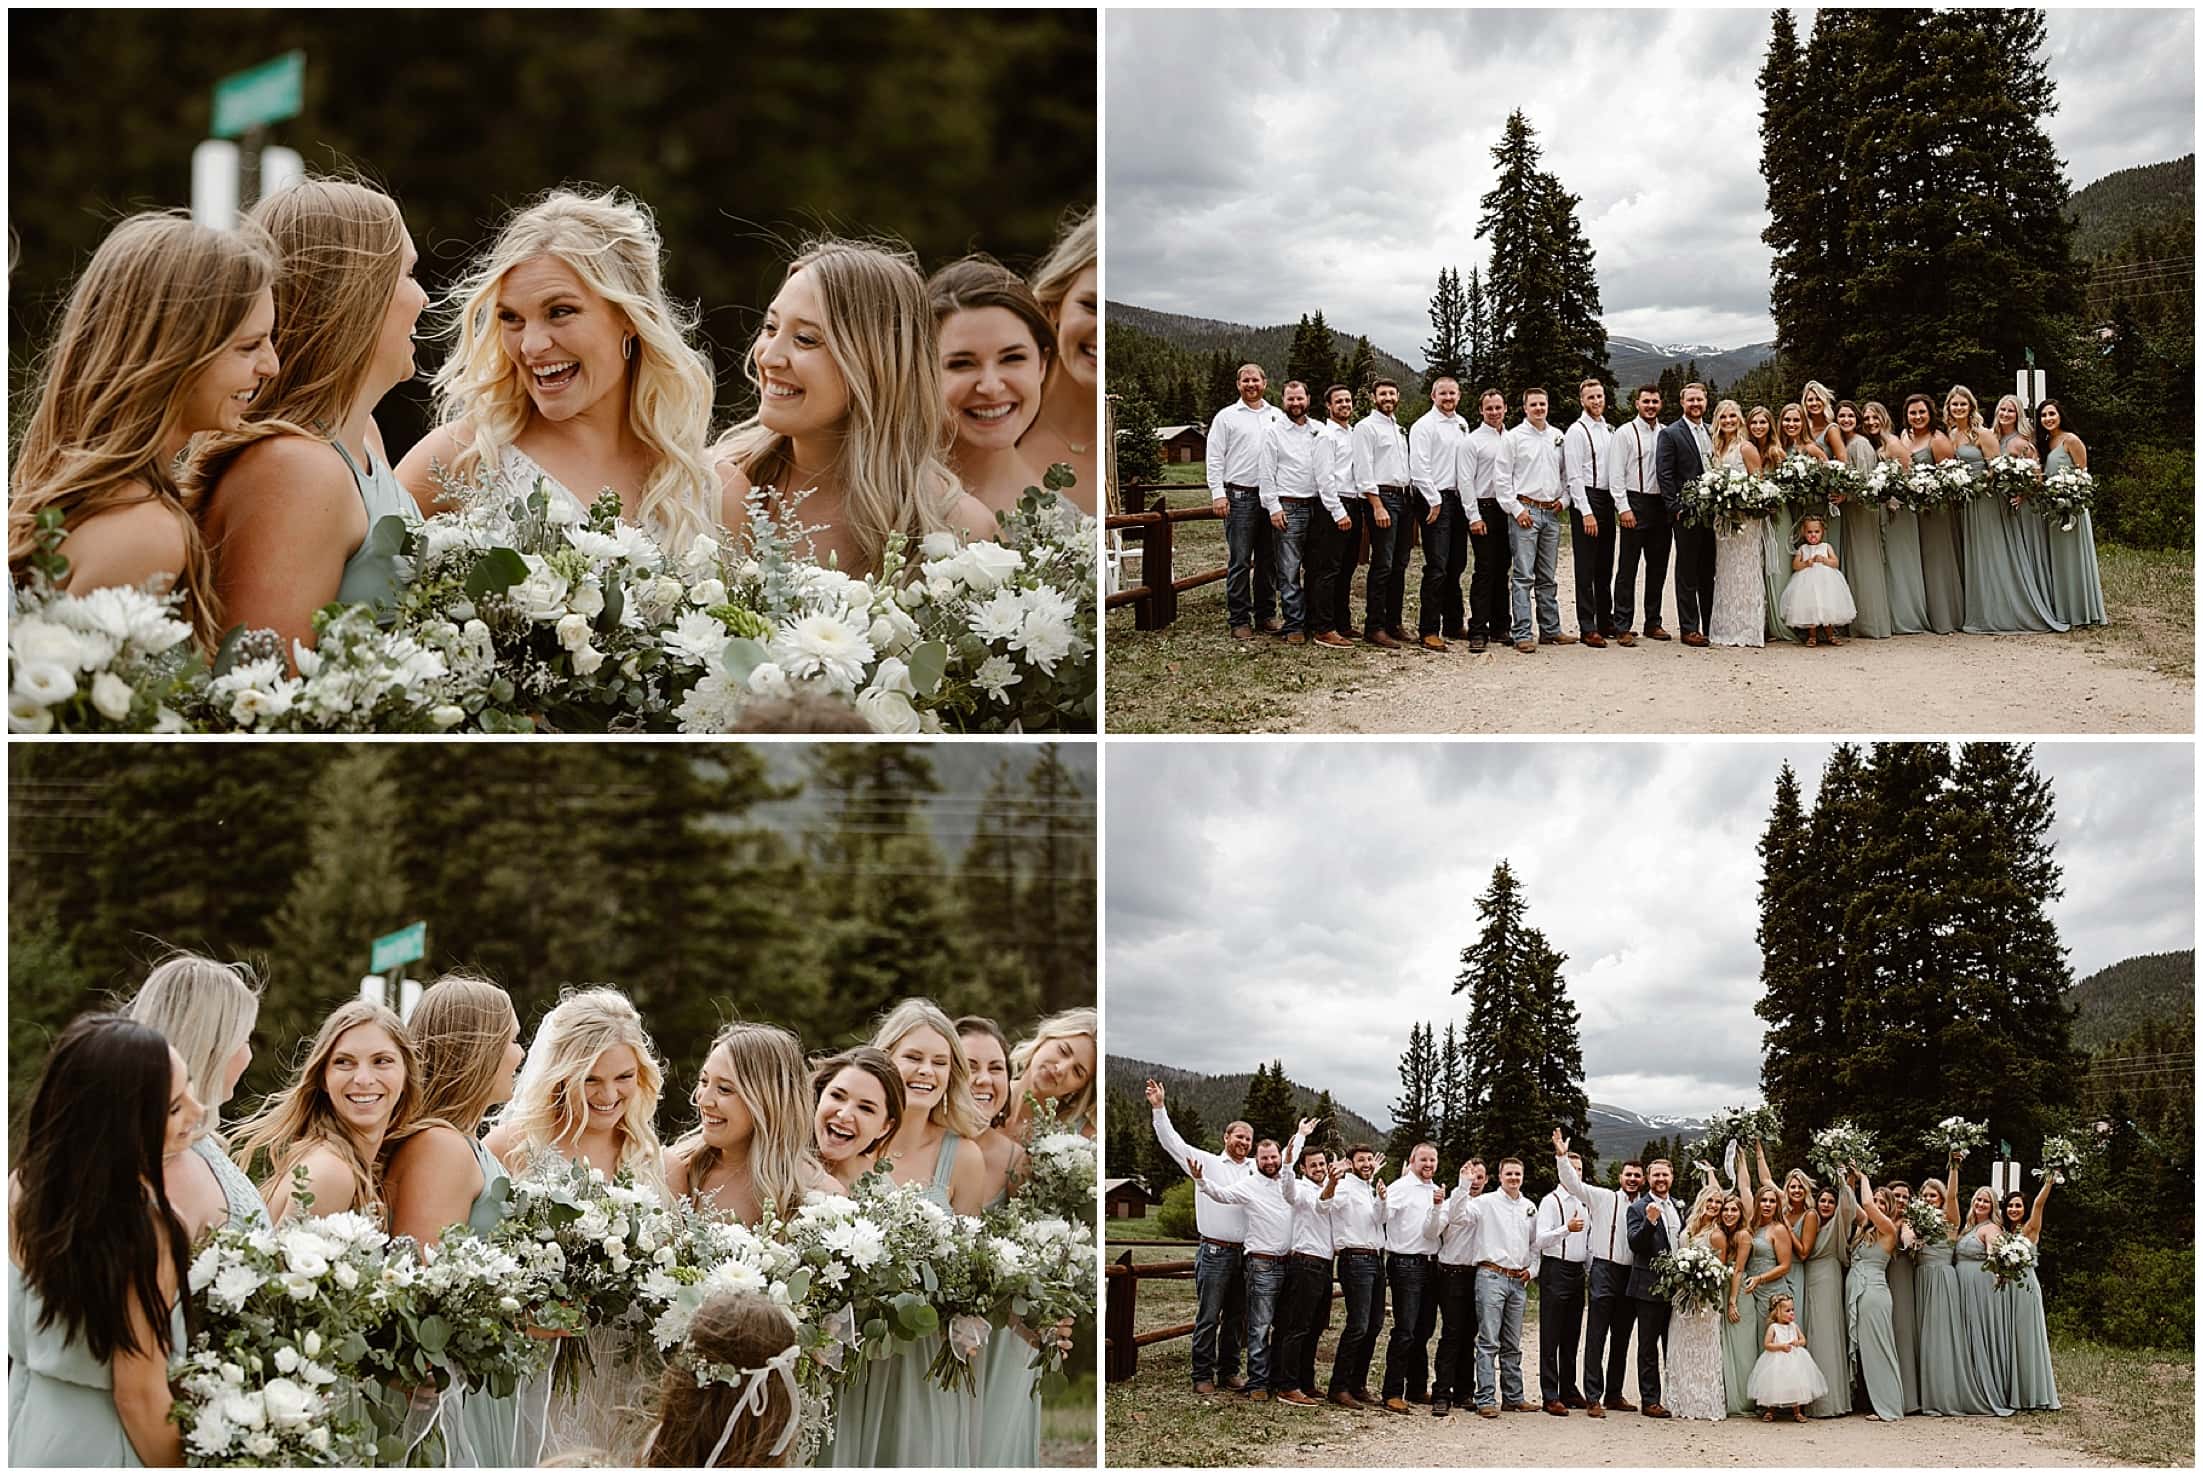 bridesmaid in the mountains, Aspen Lodge, Red River New Mexico, Red River New Mexico Wedding, Weddings in New Mexico, Destination mountain wedding, destination mountain elopement, elopements in new mexico, places to get married in new mexico, destination elopement photographer, mountain wedding photographer, new mexico wedding photographer, new mexico elopement photographer, brit nicole photography, cabin wedding, new mexico cabin wedding, mountain landscape for wedding, small intimate mountain wedding, small intimate river wedding, wedding photographer in new mexico, junebug weddings, the knot, wedding wire, 41 productions with lindsay gomez, dallas texas bride, DJ Allen Gallegos, Tao Cakes, New Mexico Wedding planner karen kelly, barnes jewelry, Lillian West bridal dress, Lang’s Bridal, enchanted florist wedding flowers, places to get married in texas, texas wedding photographer, texas elopement photographer, forest wedding, forest elopement, wooded area for wedding, wooded elopement, elopement in the woods, amarillo wedding photographer, amarillo elopement photographer